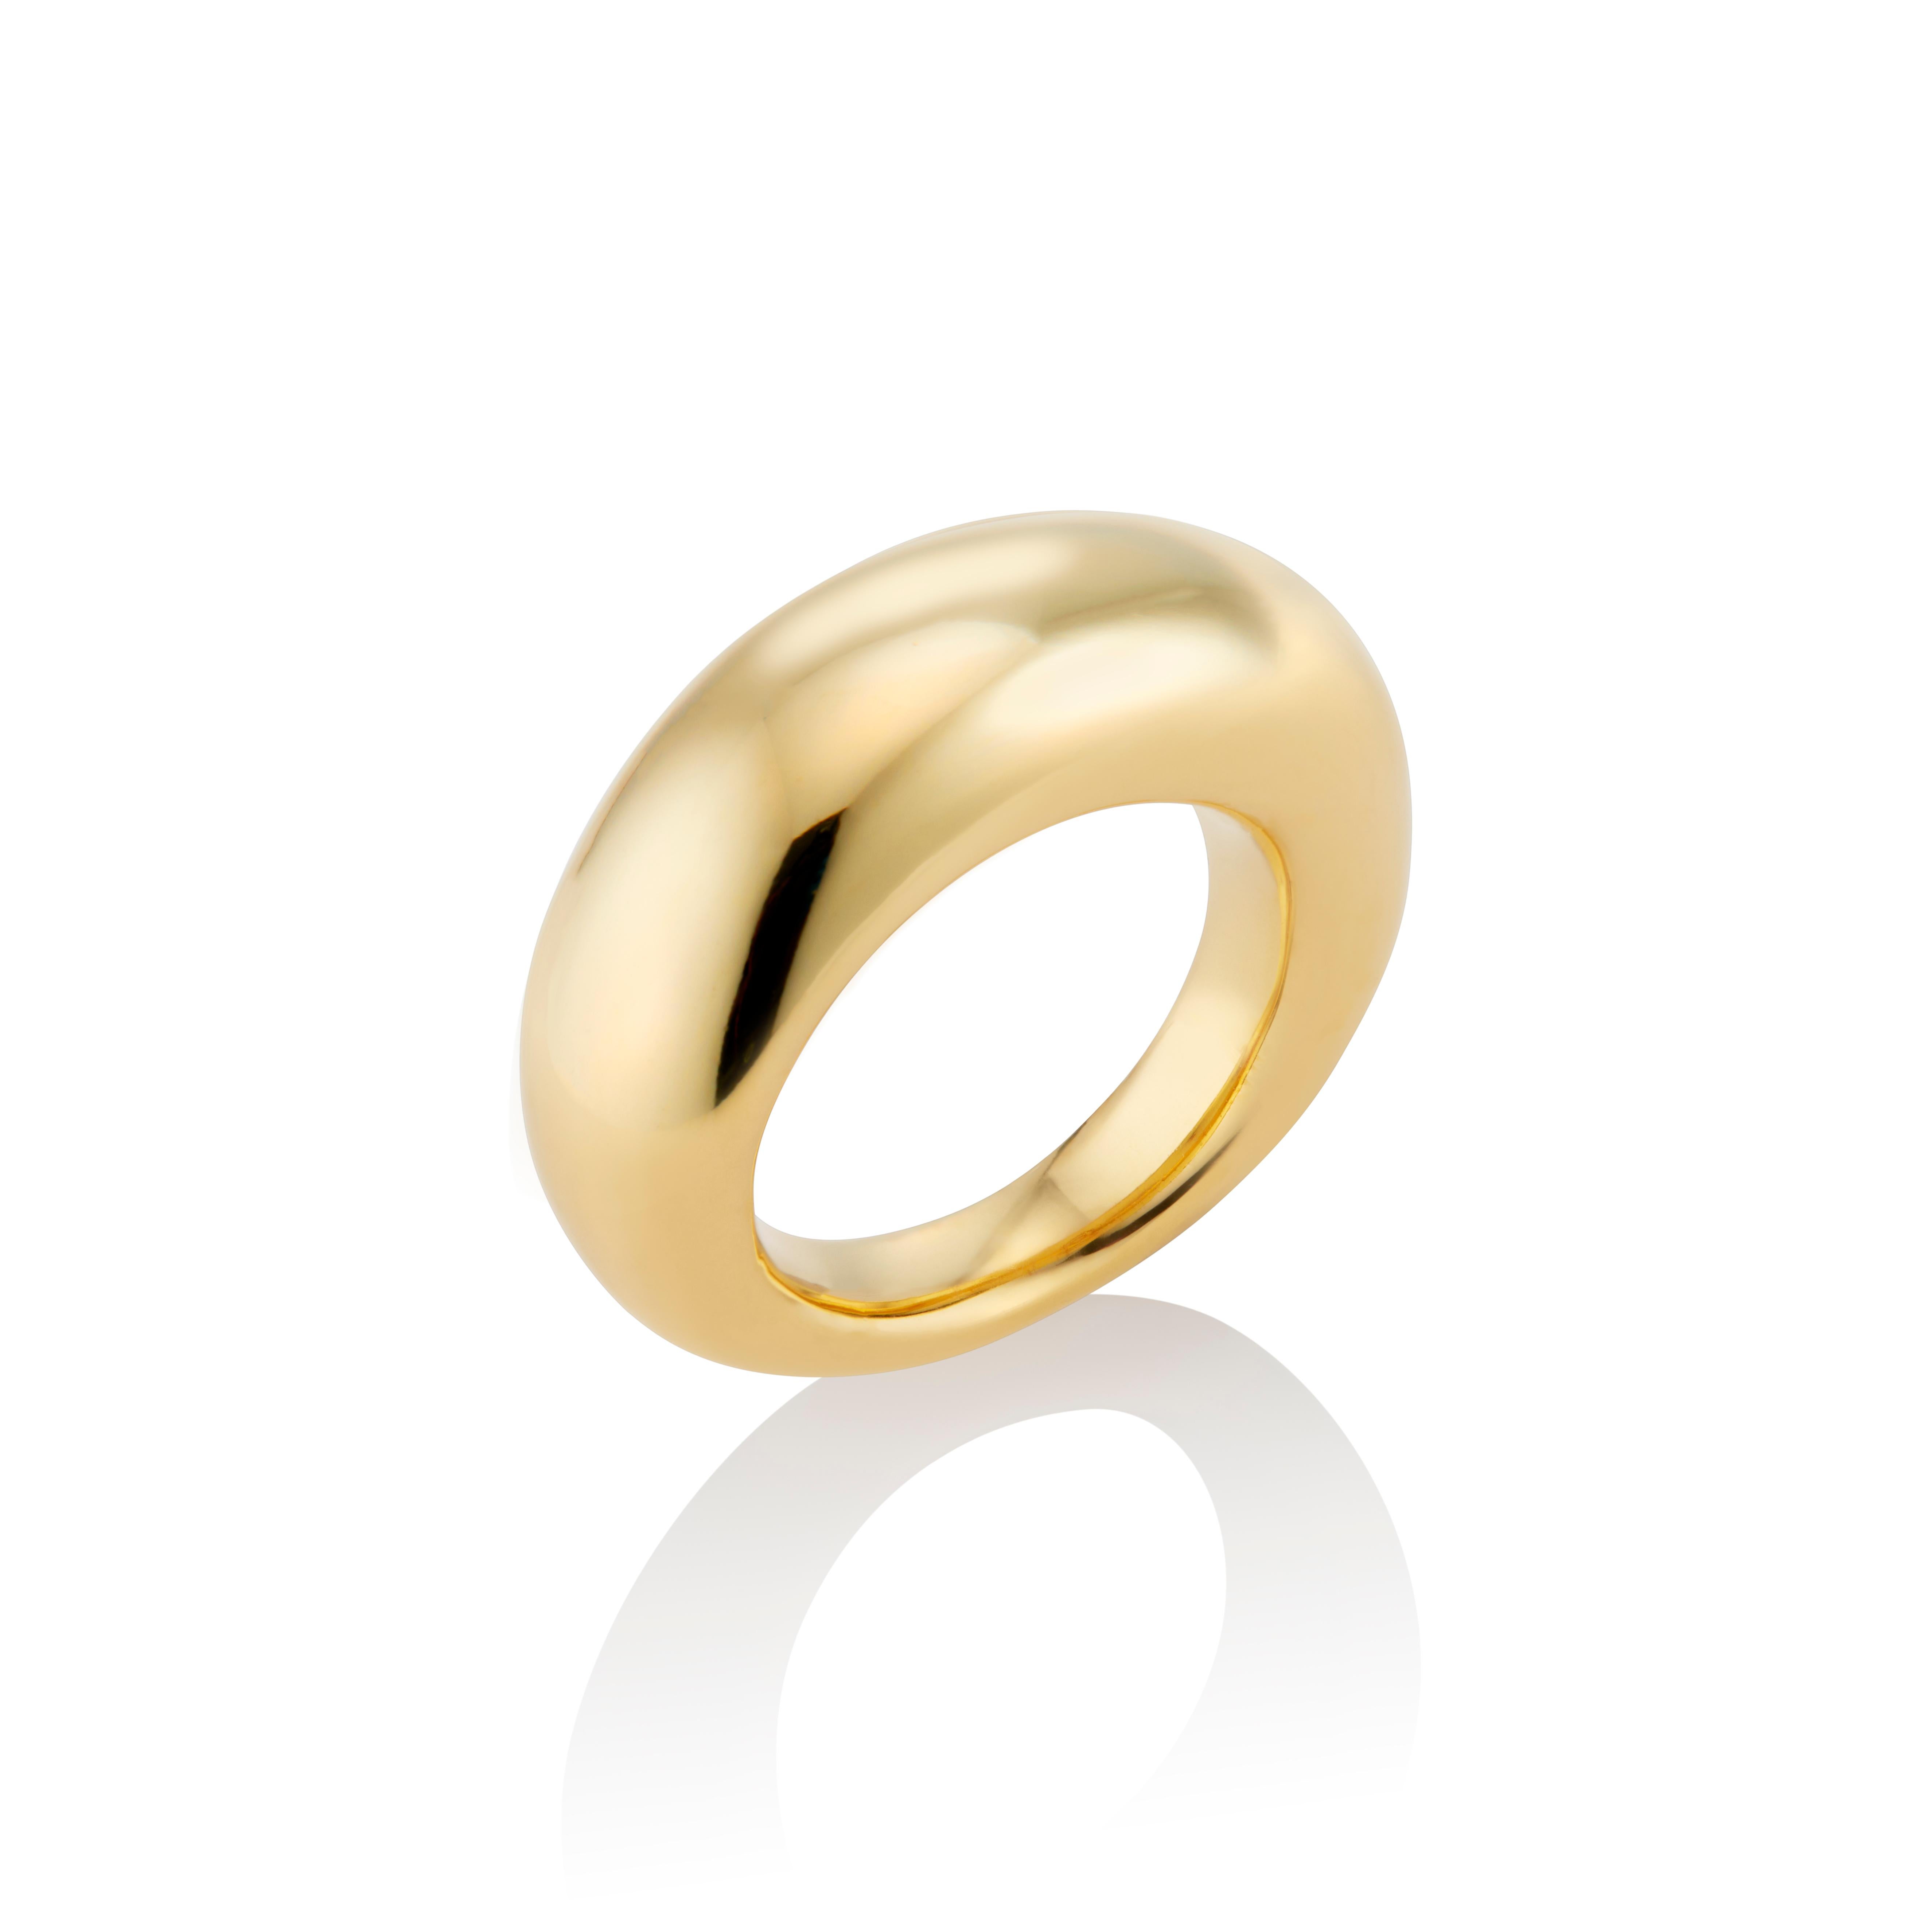 This fun 22 Karat Gold Vermeil Puff Ring is a spin on a classic shape, designed for the modern jewelry lover who appreciates timeless pieces with a sophisticated edge.  

Size 6.5- Ring Size is customizable.

All items are made to order, please